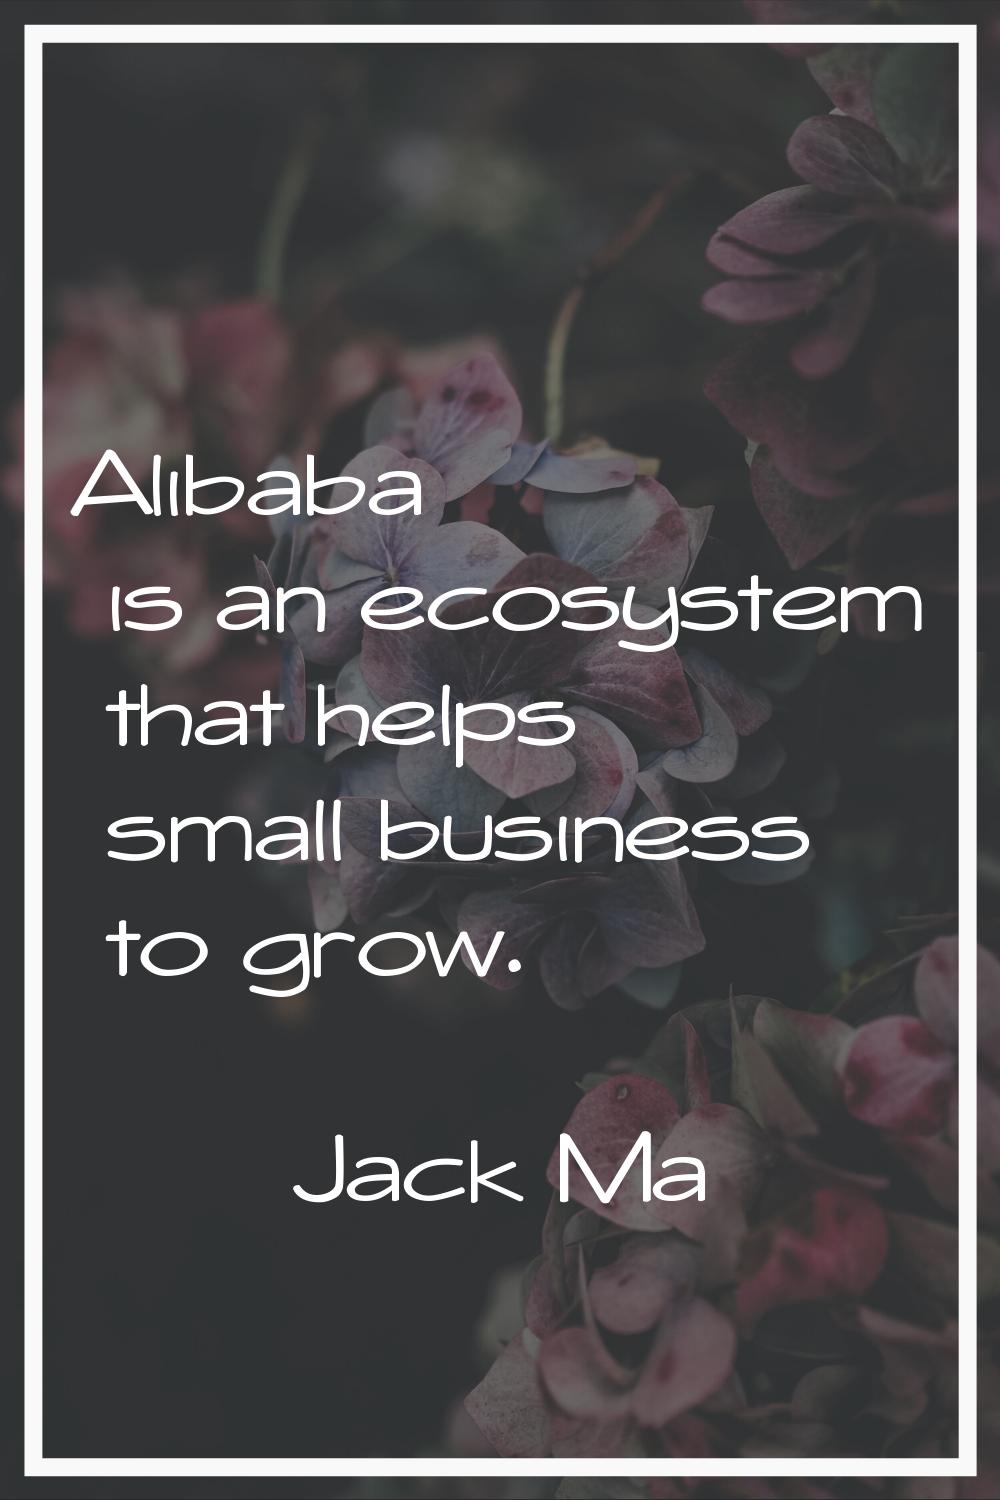 Alibaba is an ecosystem that helps small business to grow.